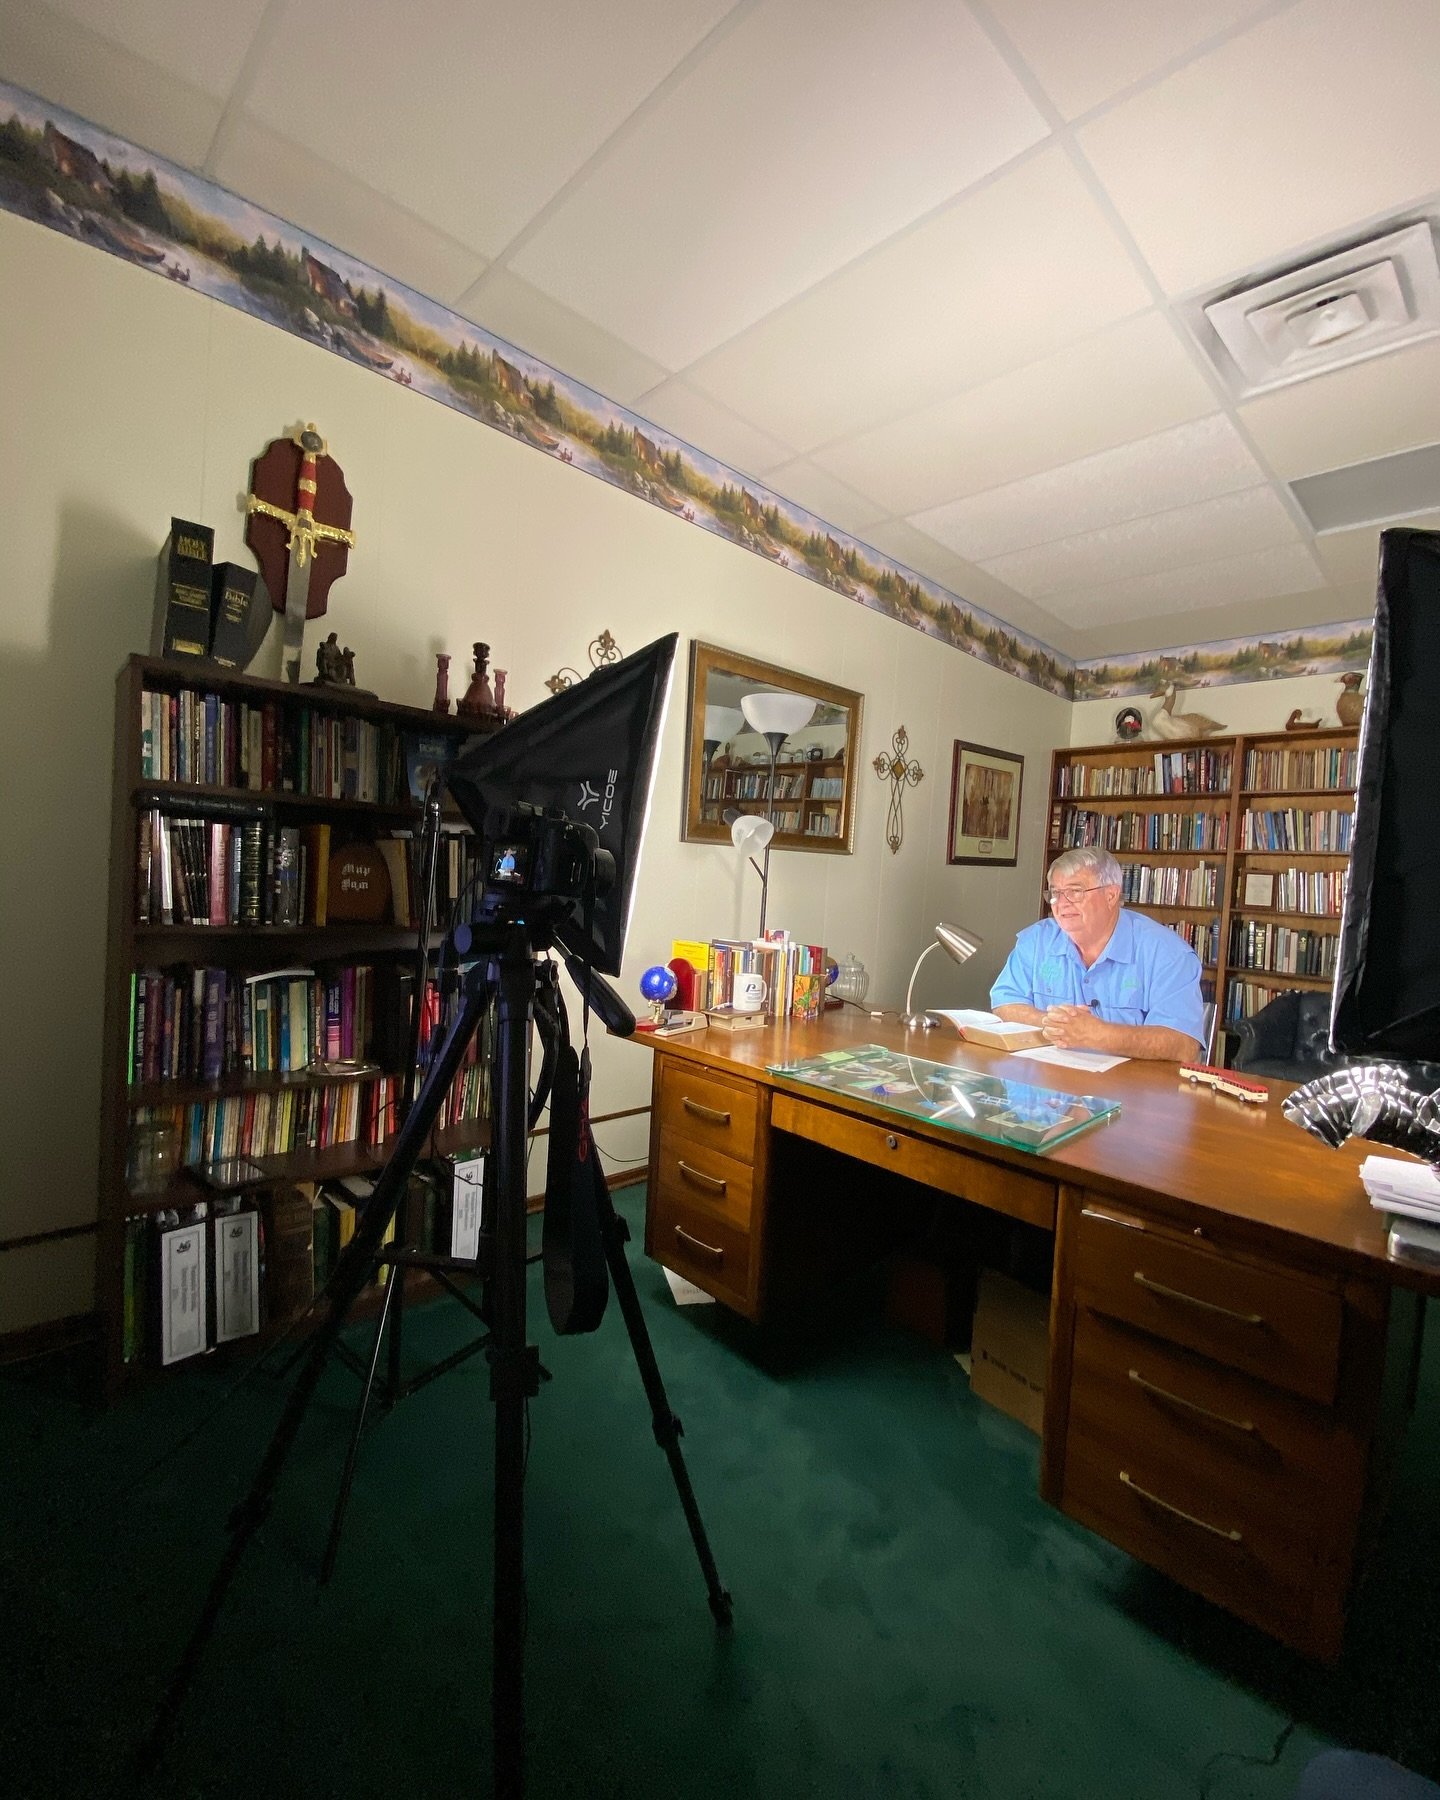 Throwback to September of 2020, not long after we started pre-recording our Sunday evening Bible studies. We have quite the library now! Check it out at https://www.oxfordag.org/digital-library